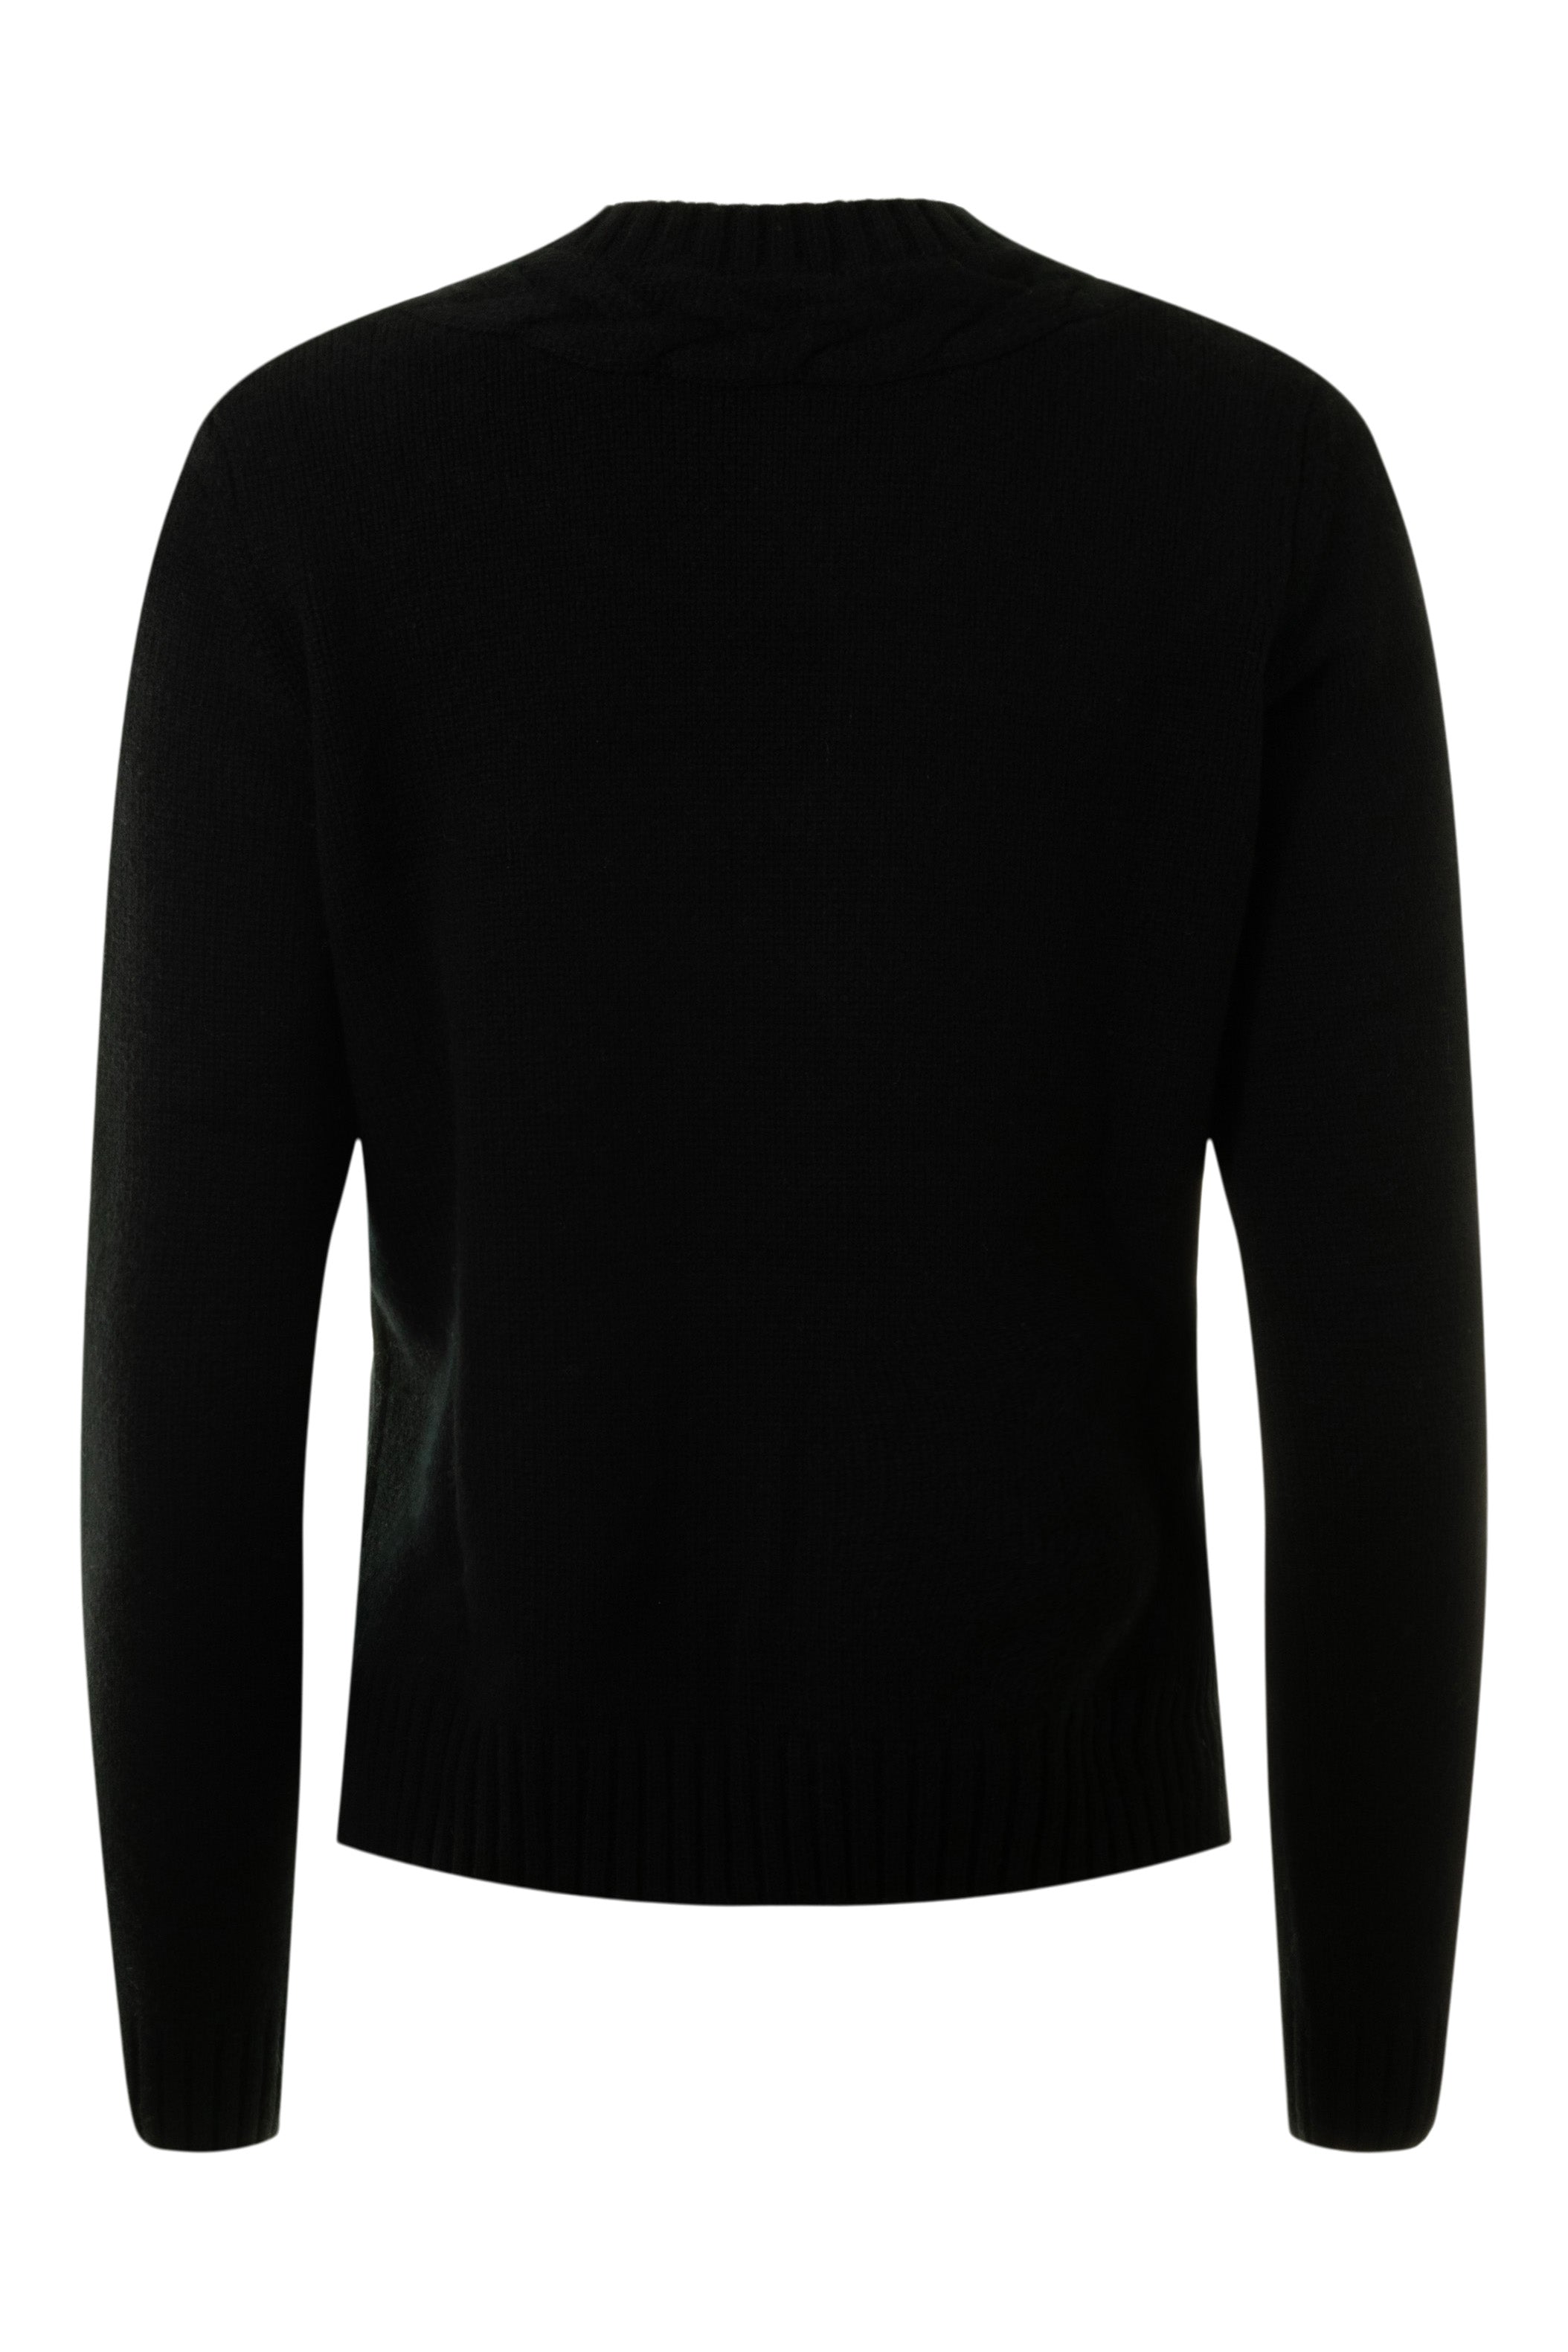 Autumn Cashmere 6 ply Cable Crewneck Sweater in Black